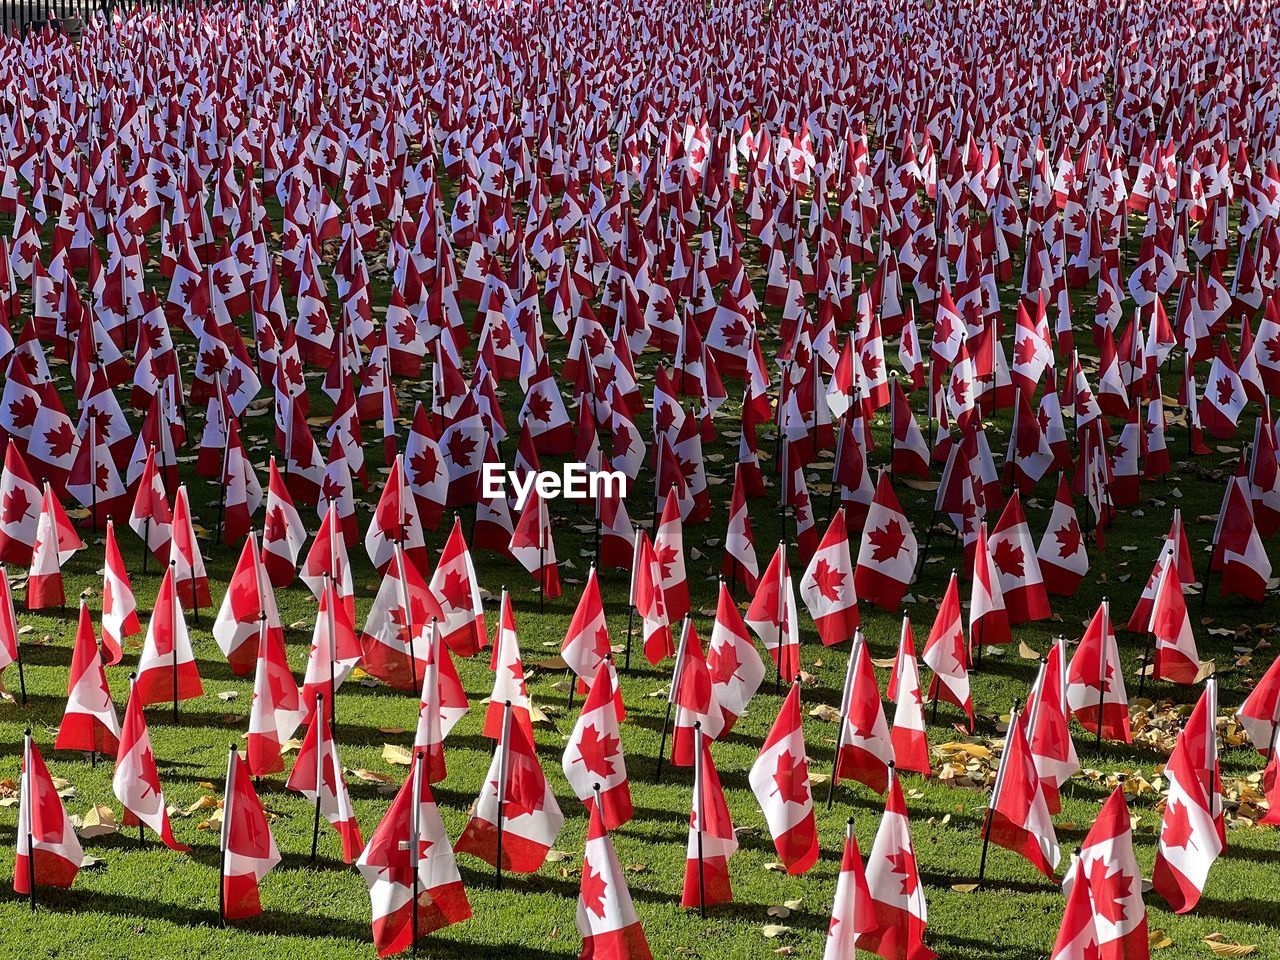 marching, group of people, crowd, red, grass, stadium, musician, day, cheering, in a row, sports, event, large group of people, celebration, outdoors, clothing, nature, plant, high angle view